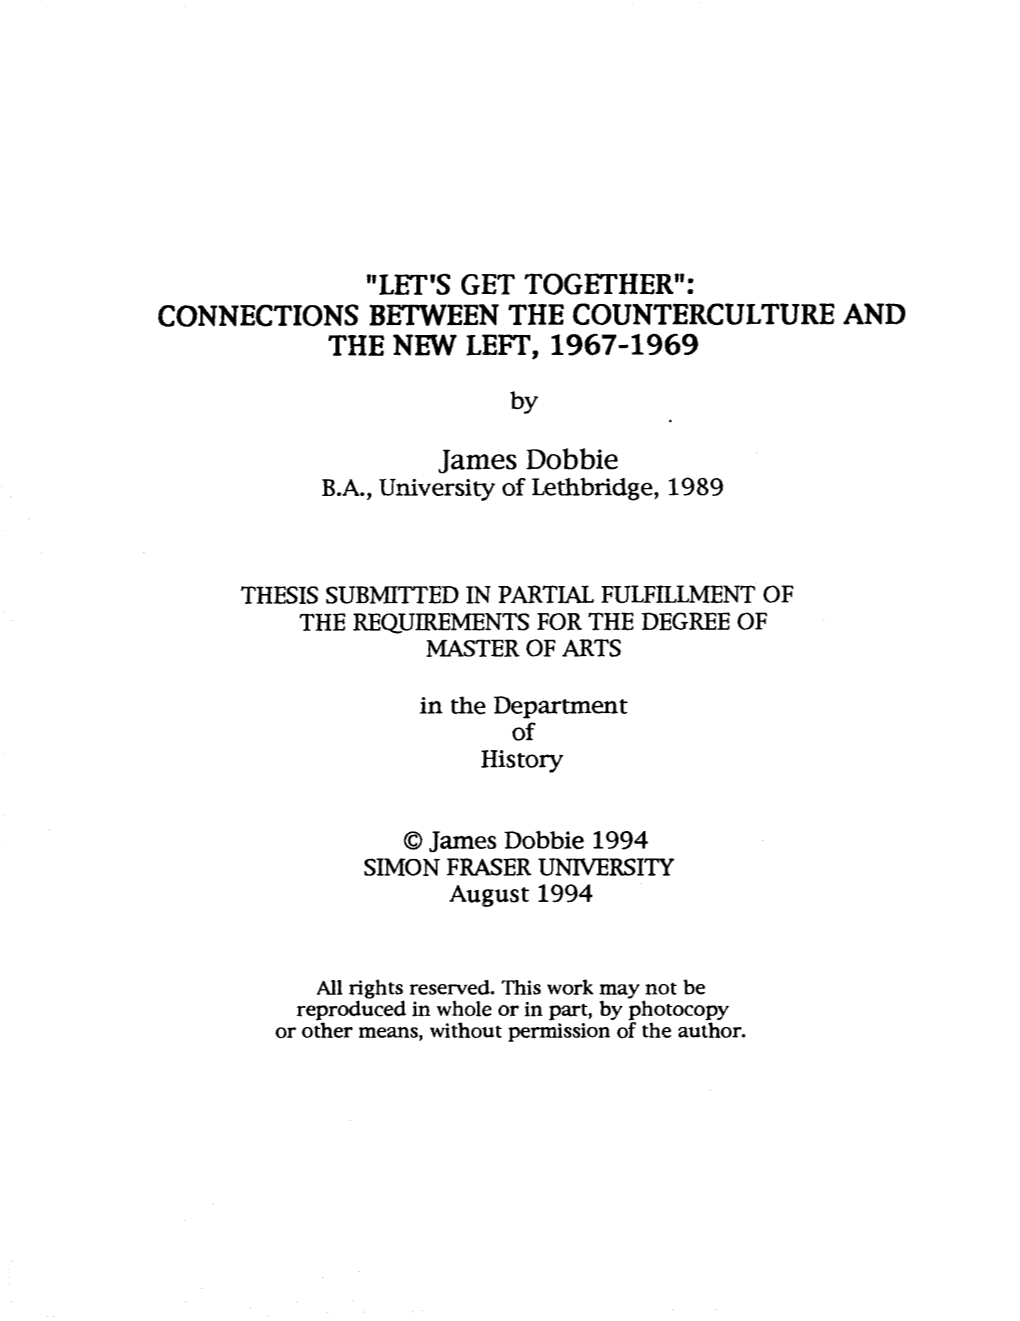 Connections Between the Counterculture and the New Left, 1967-1969